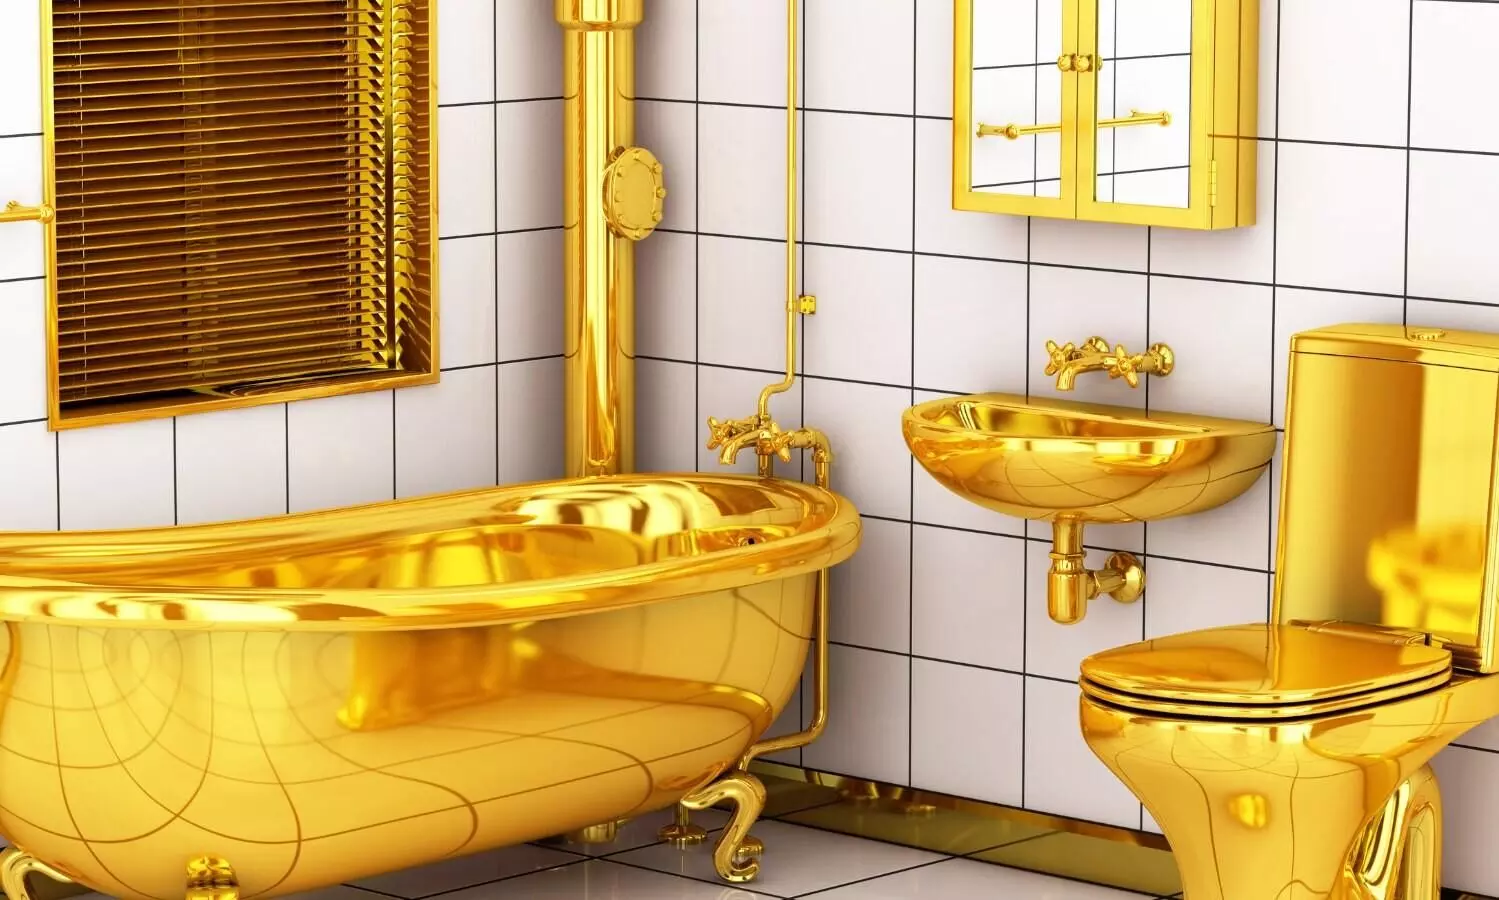 Golden Toilet Steals the Show During Bribery Probe in Russian